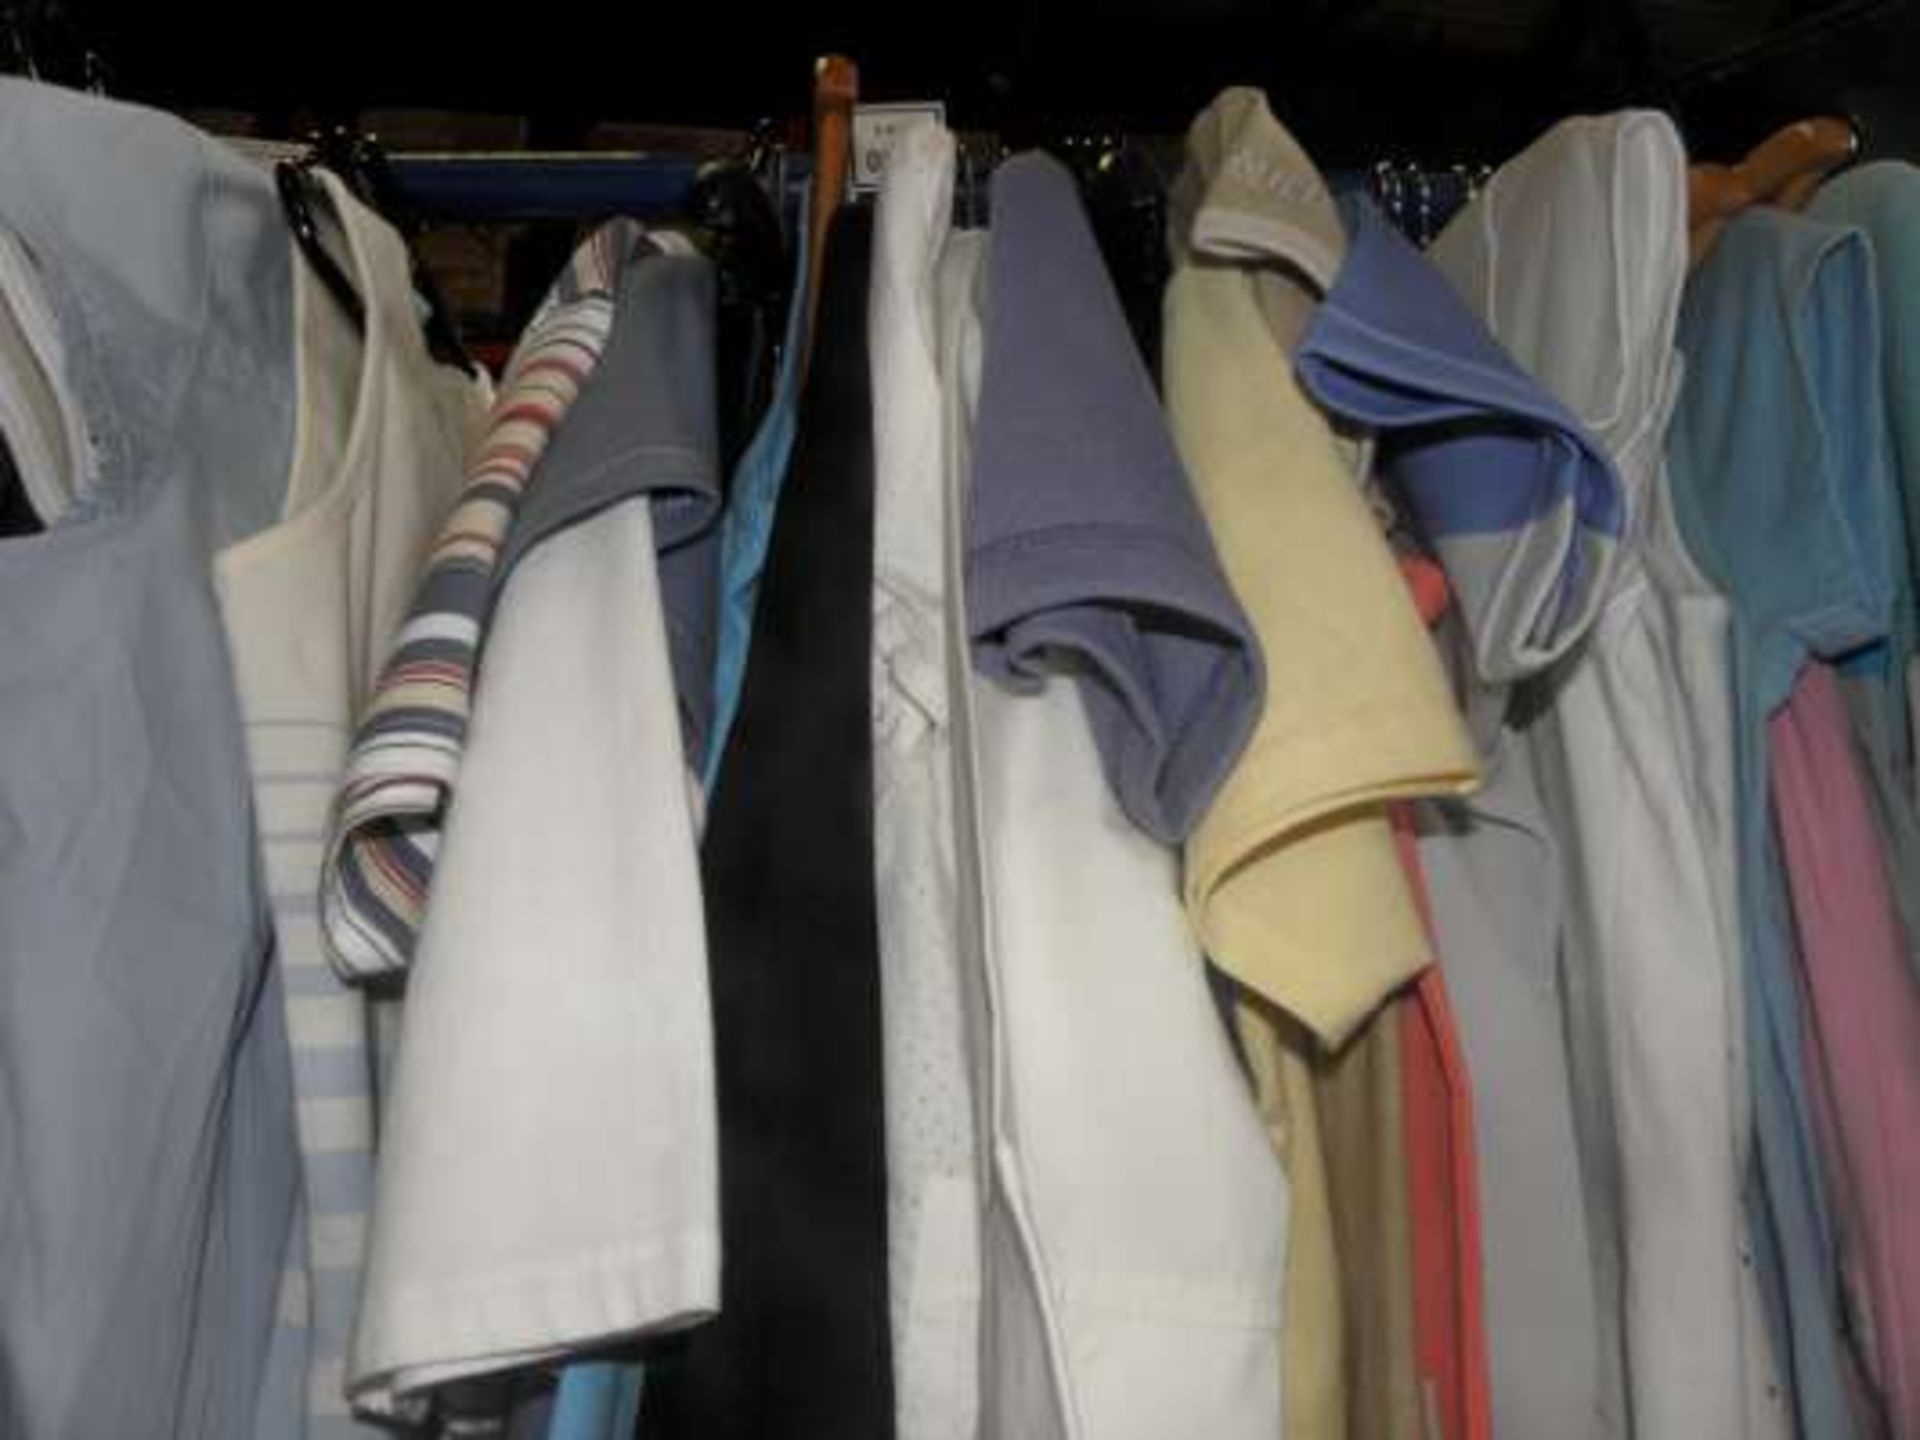 15 X LADIES TOPS / BLOUSES SIZE SMALL BY EG O'NEILL, COLUMBIA, QUICKSILVER ETC